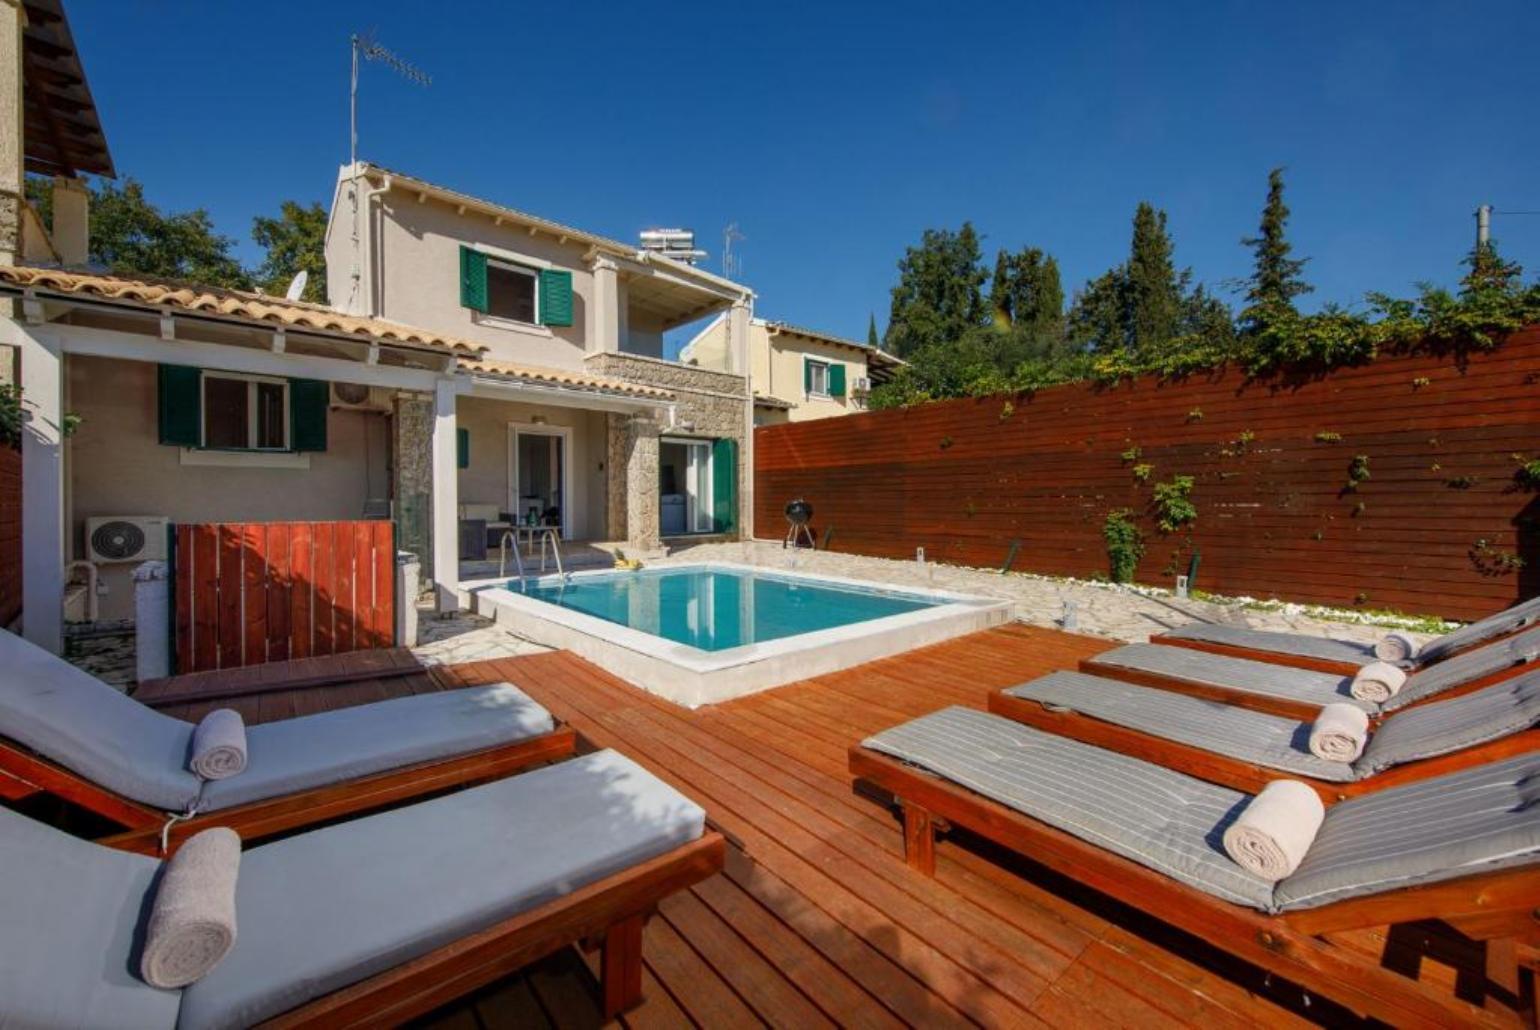 Beautiful villa with private swimming pool and sheltered area